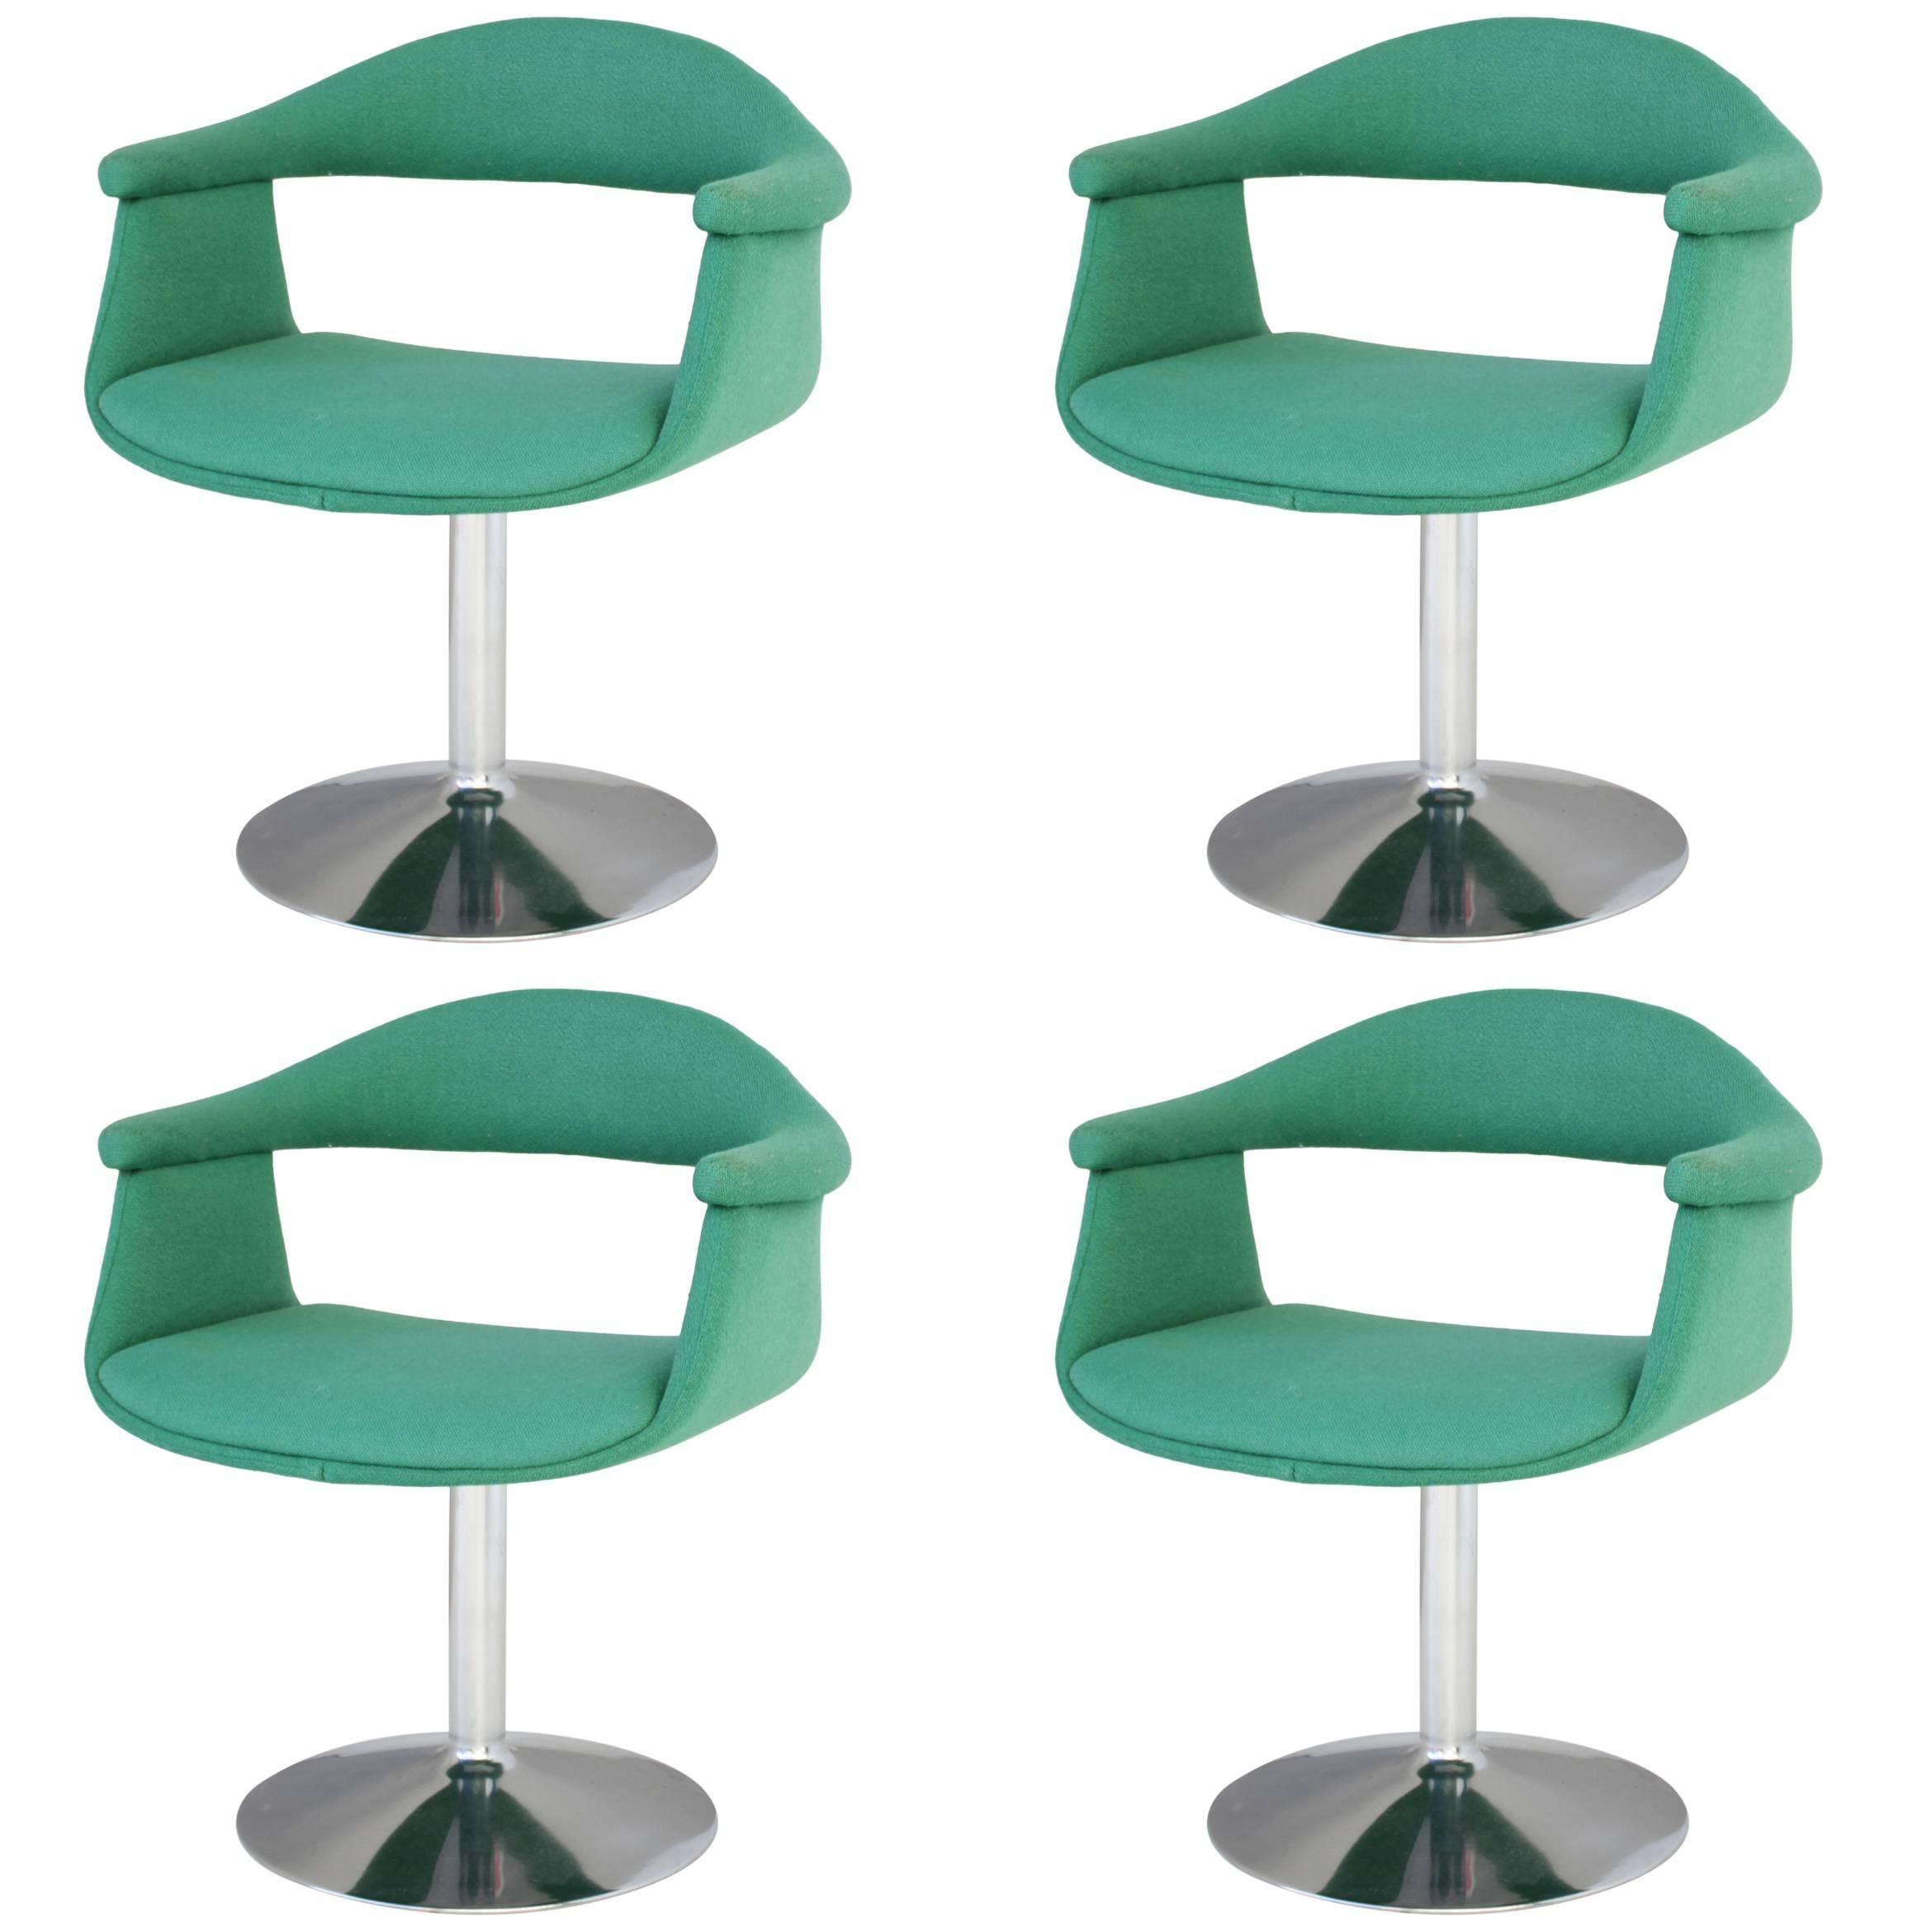 Six 'Captain's' Swivel Chairs by Eero Aarnio for Asko